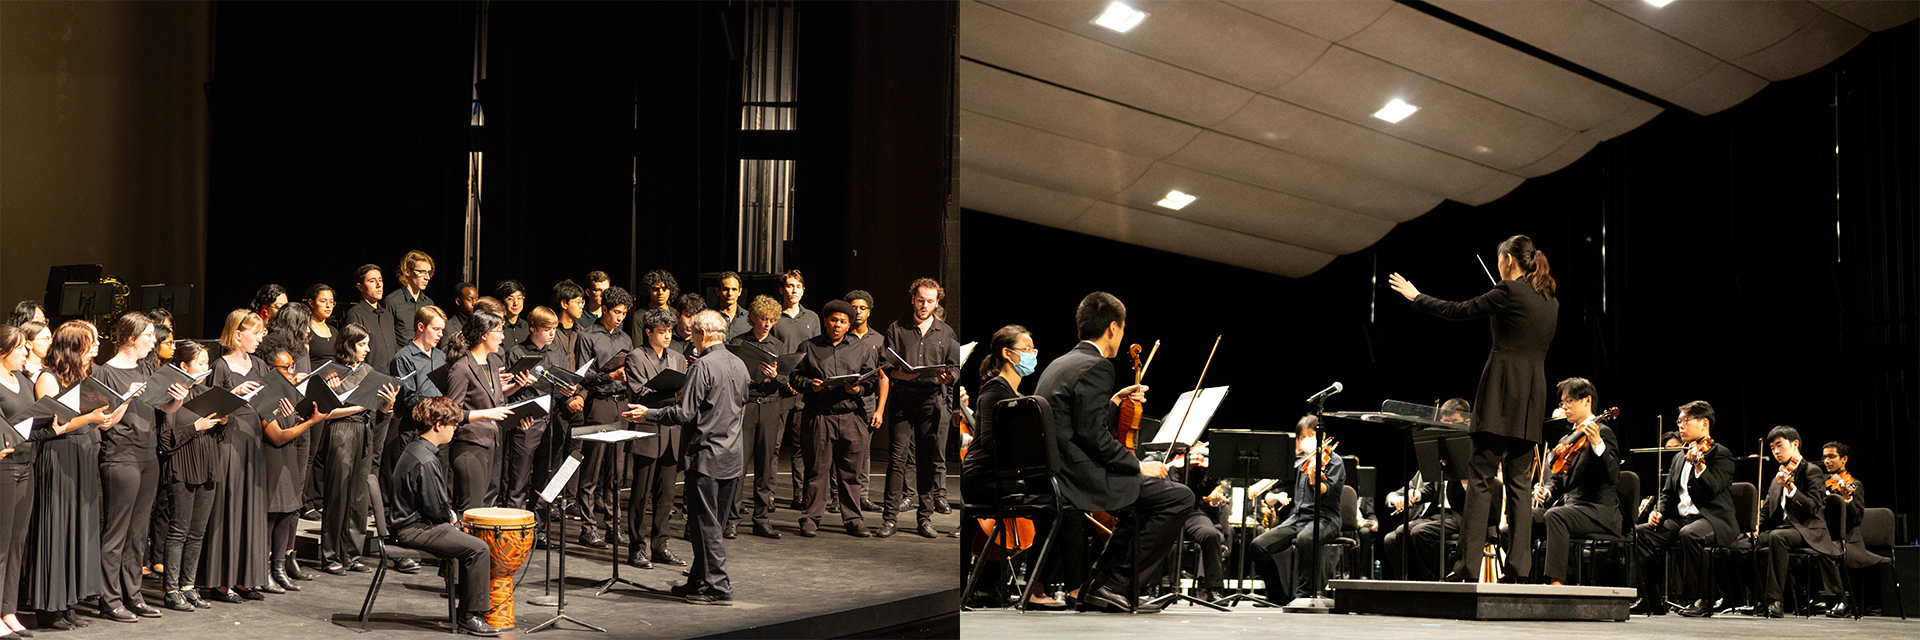 Diptych featuring Georgia Tech choirs and Symphony Orchestra